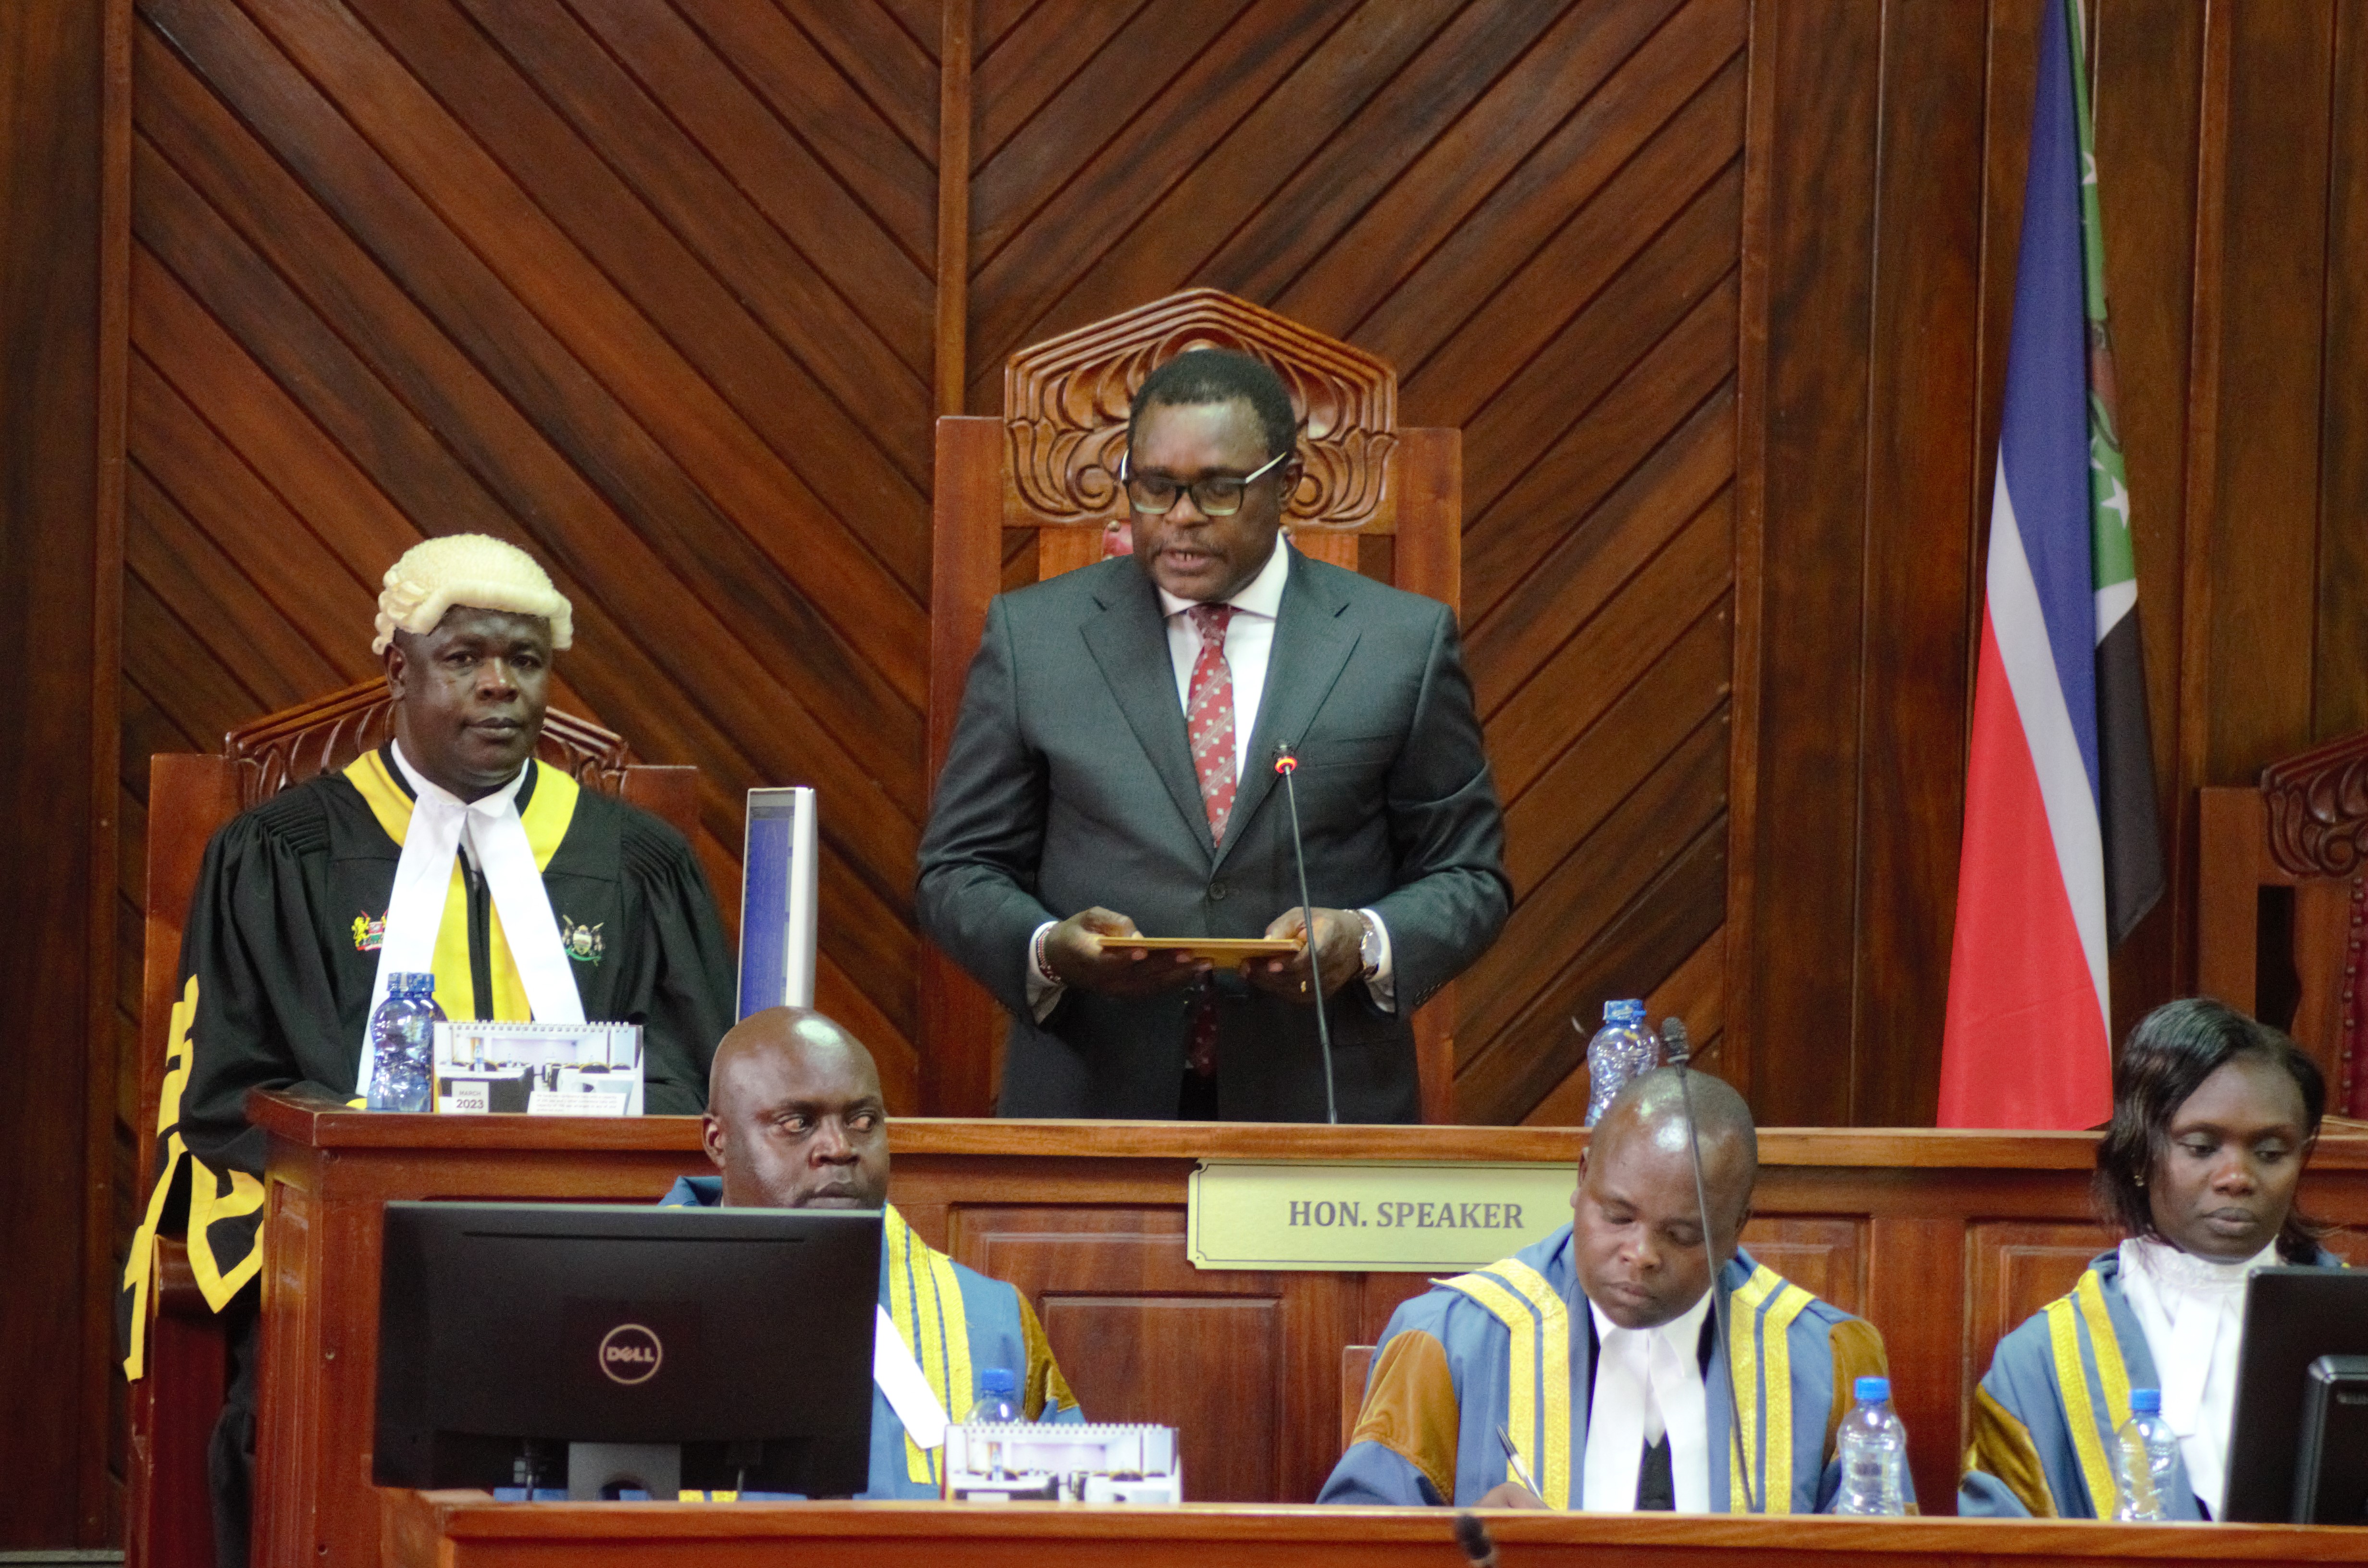 H.E. Governor Ken Lusaka addresses the Second Session of the Third County Assembly